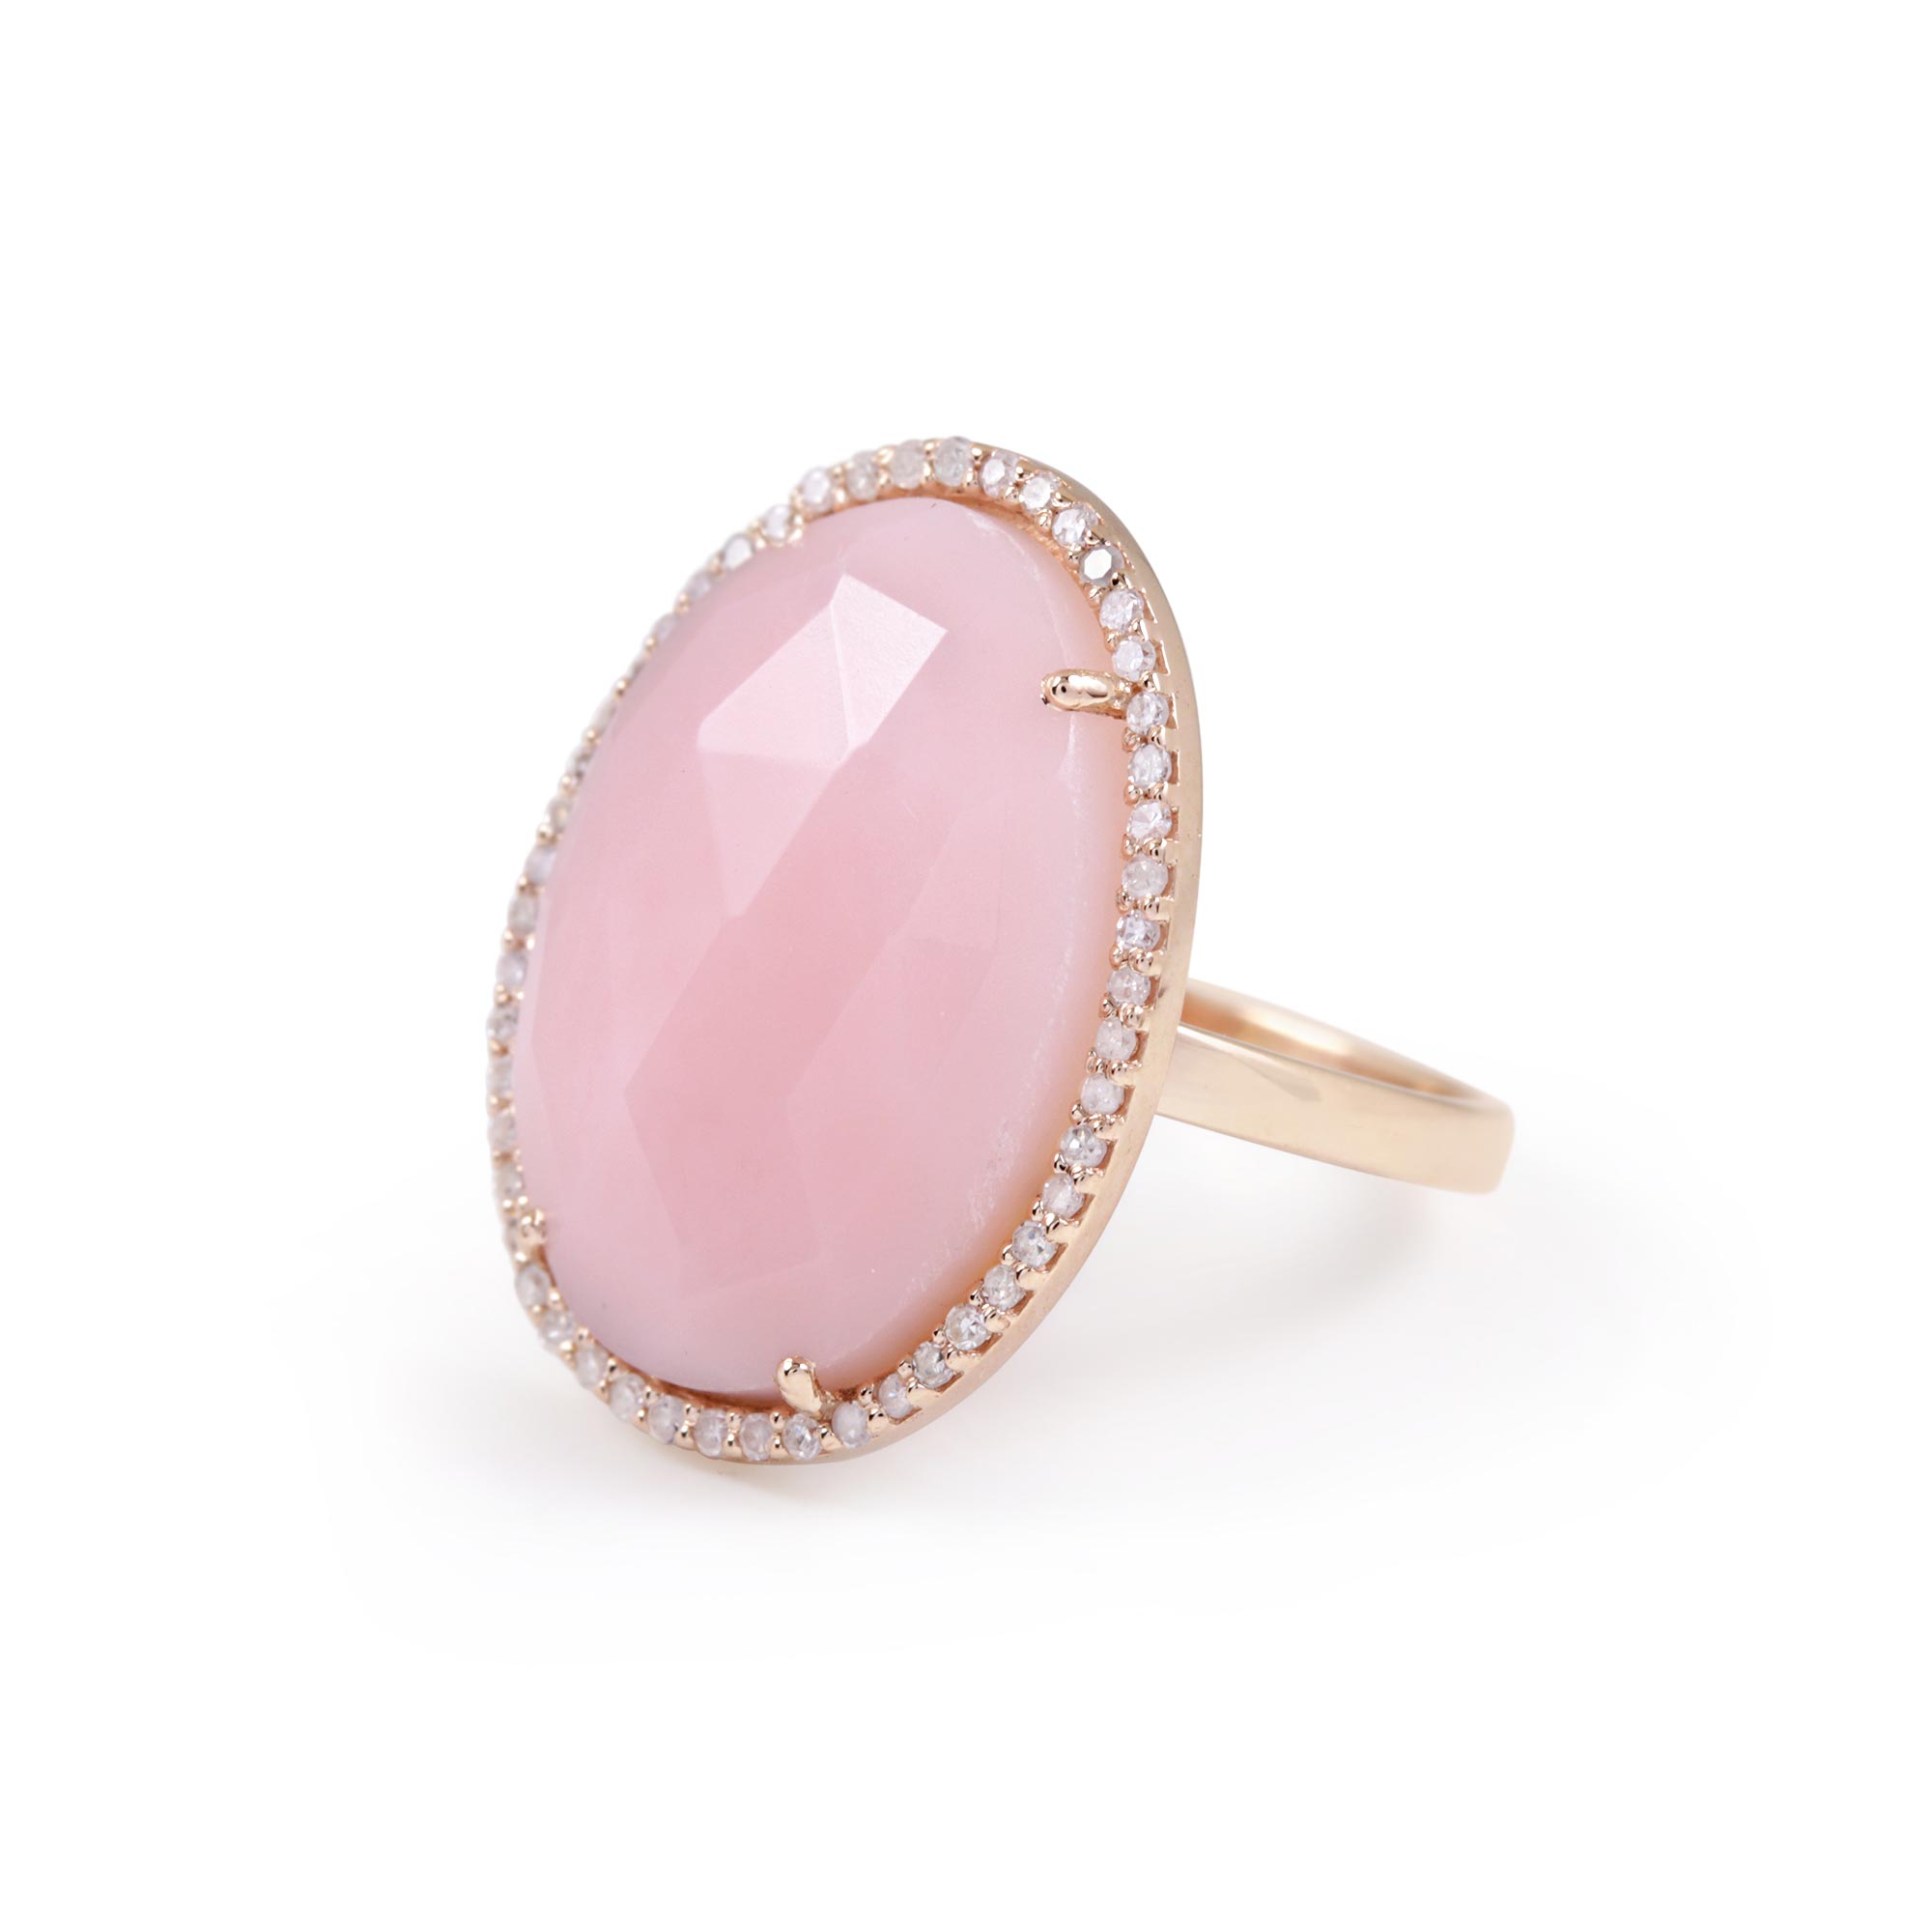 14K Solid Gold Pave Diamond Ring Pink Pink Opal Jewelry